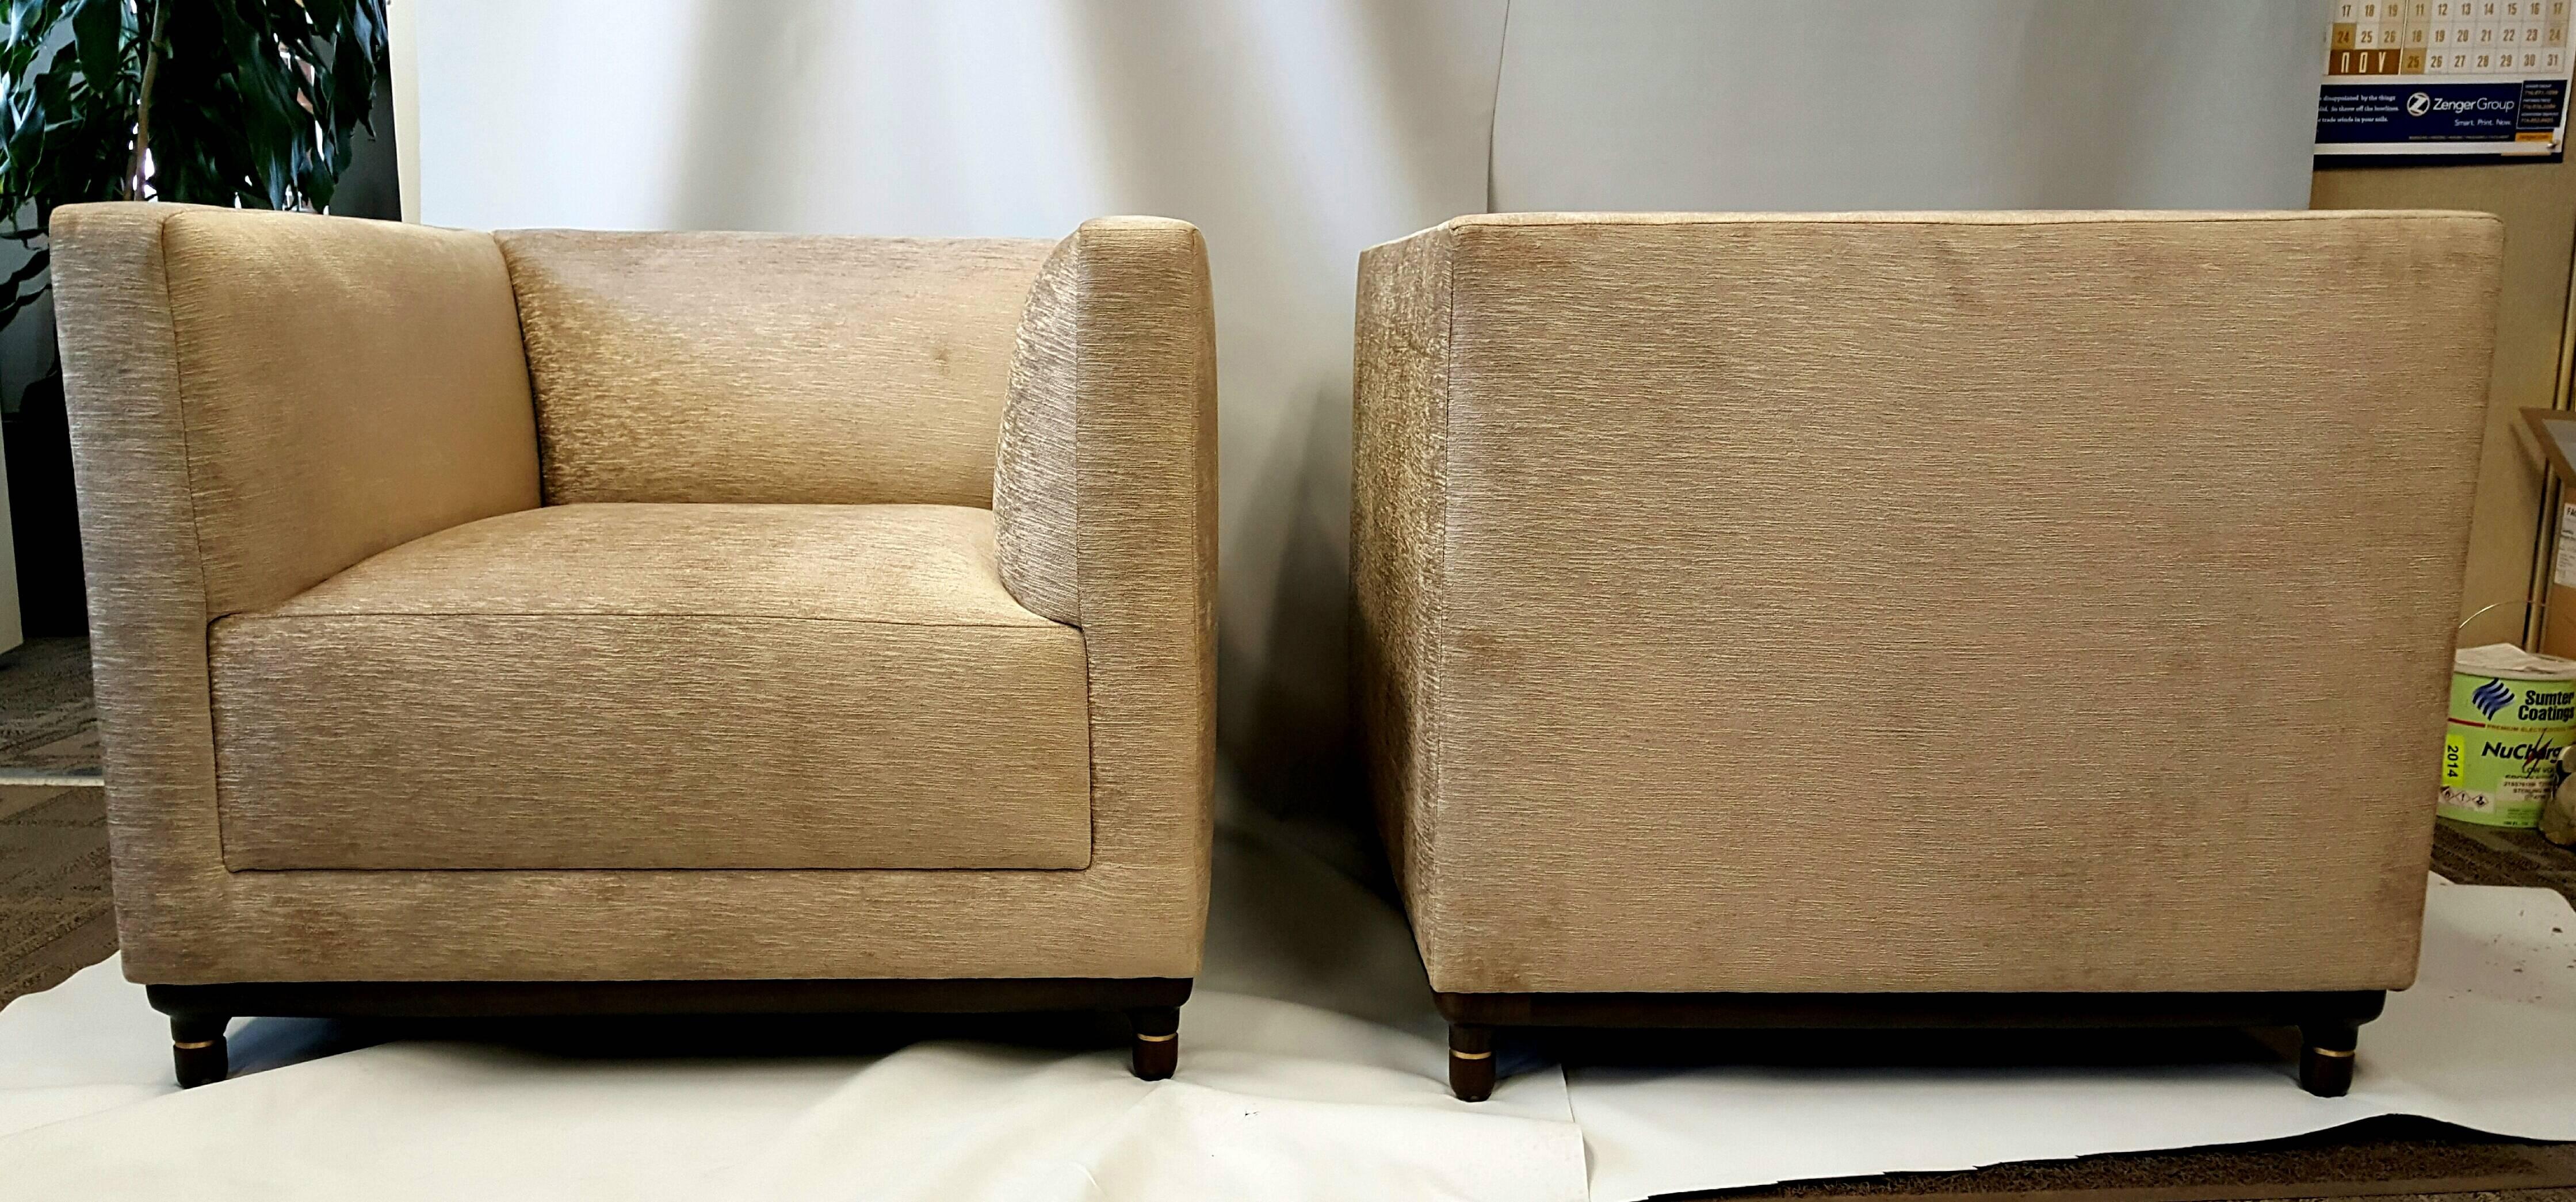 Stunning pair of oversized lounge chairs. Classic Art Deco 